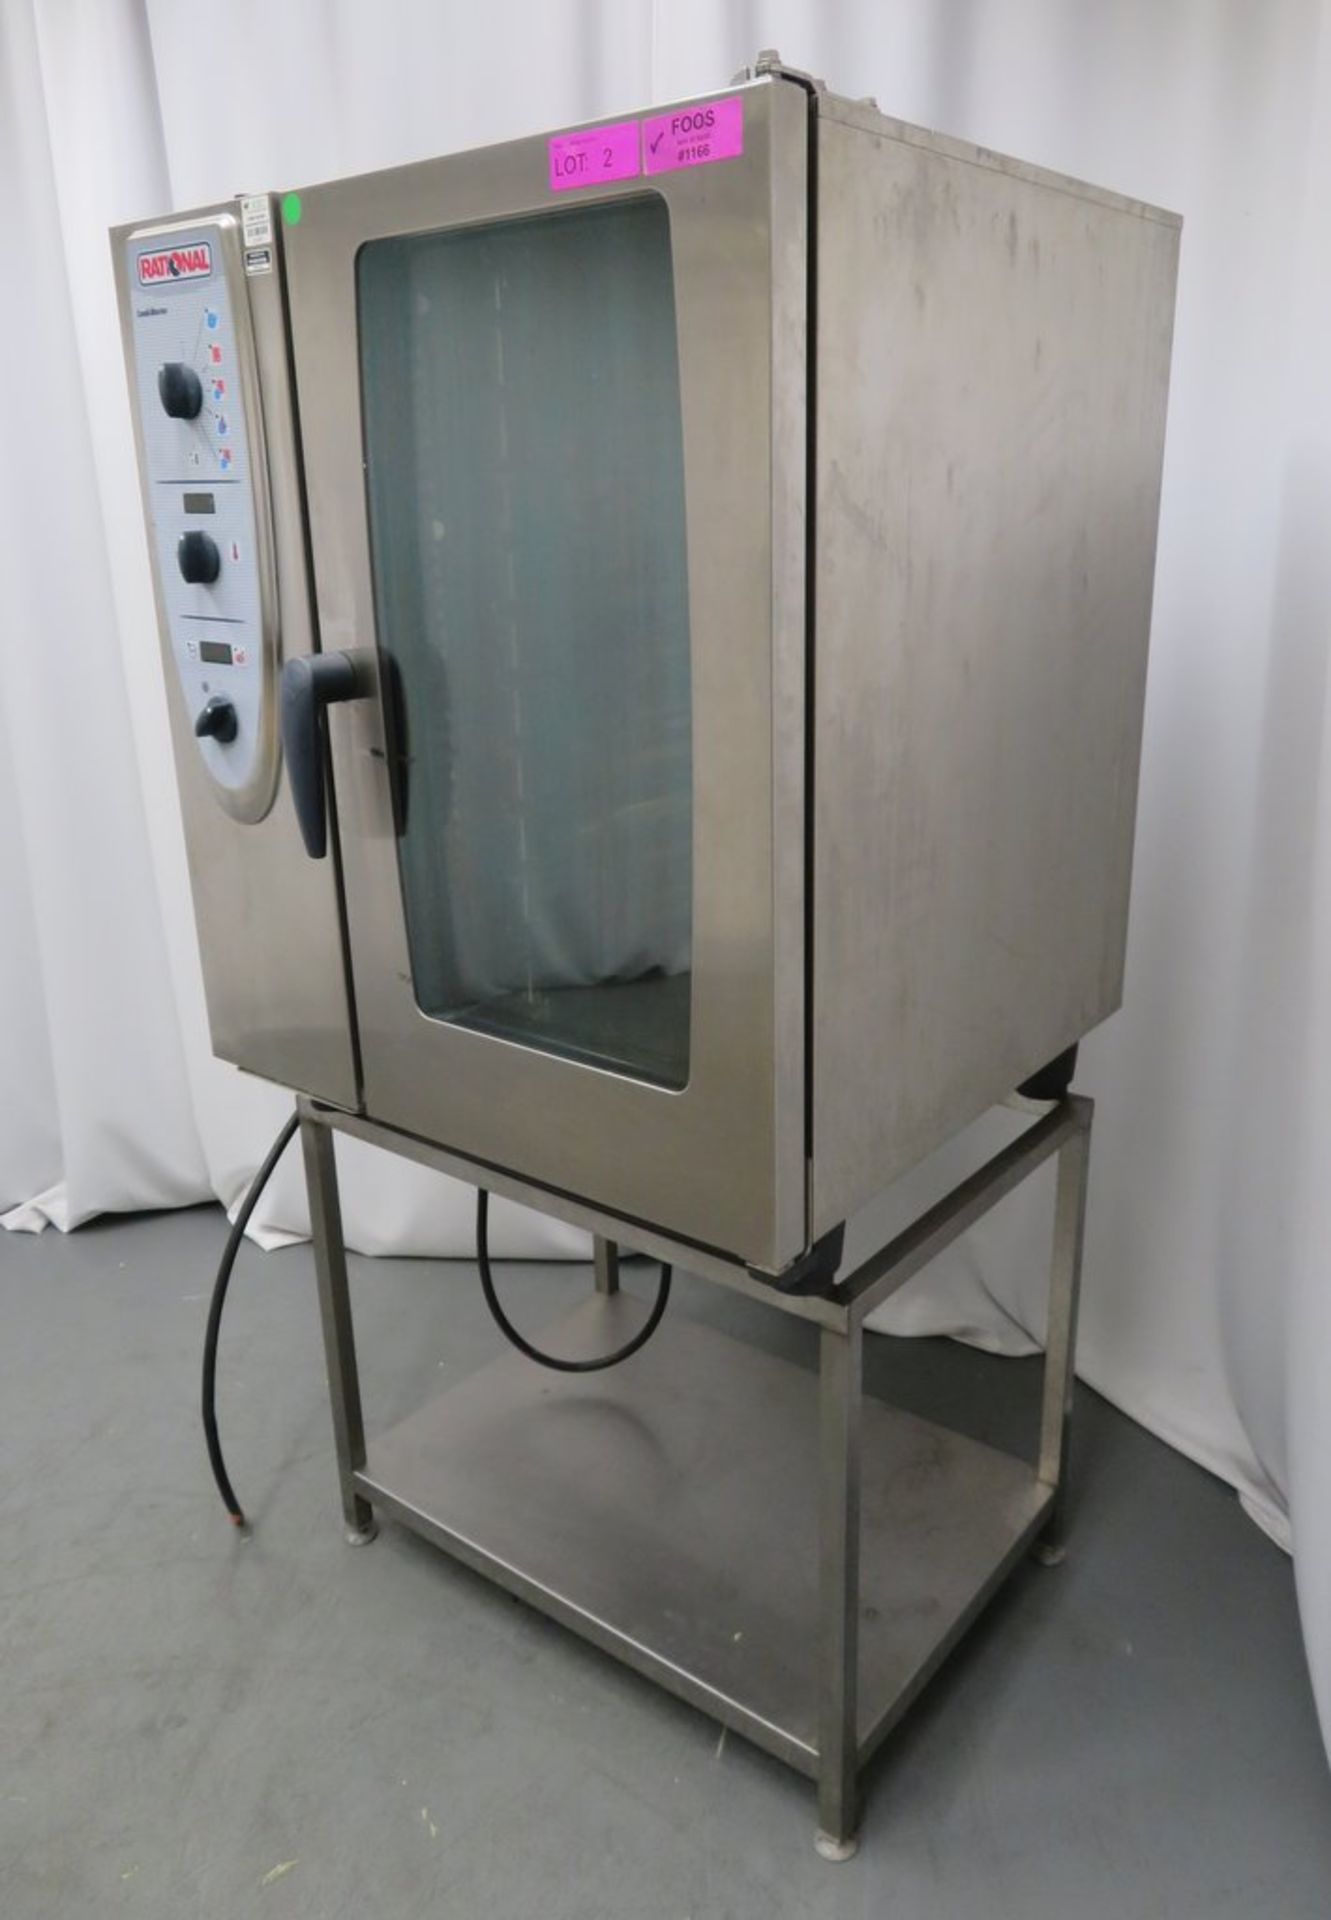 Rational CombiMaster CM101 10 grid combi oven, 3 phase electric - Image 3 of 8